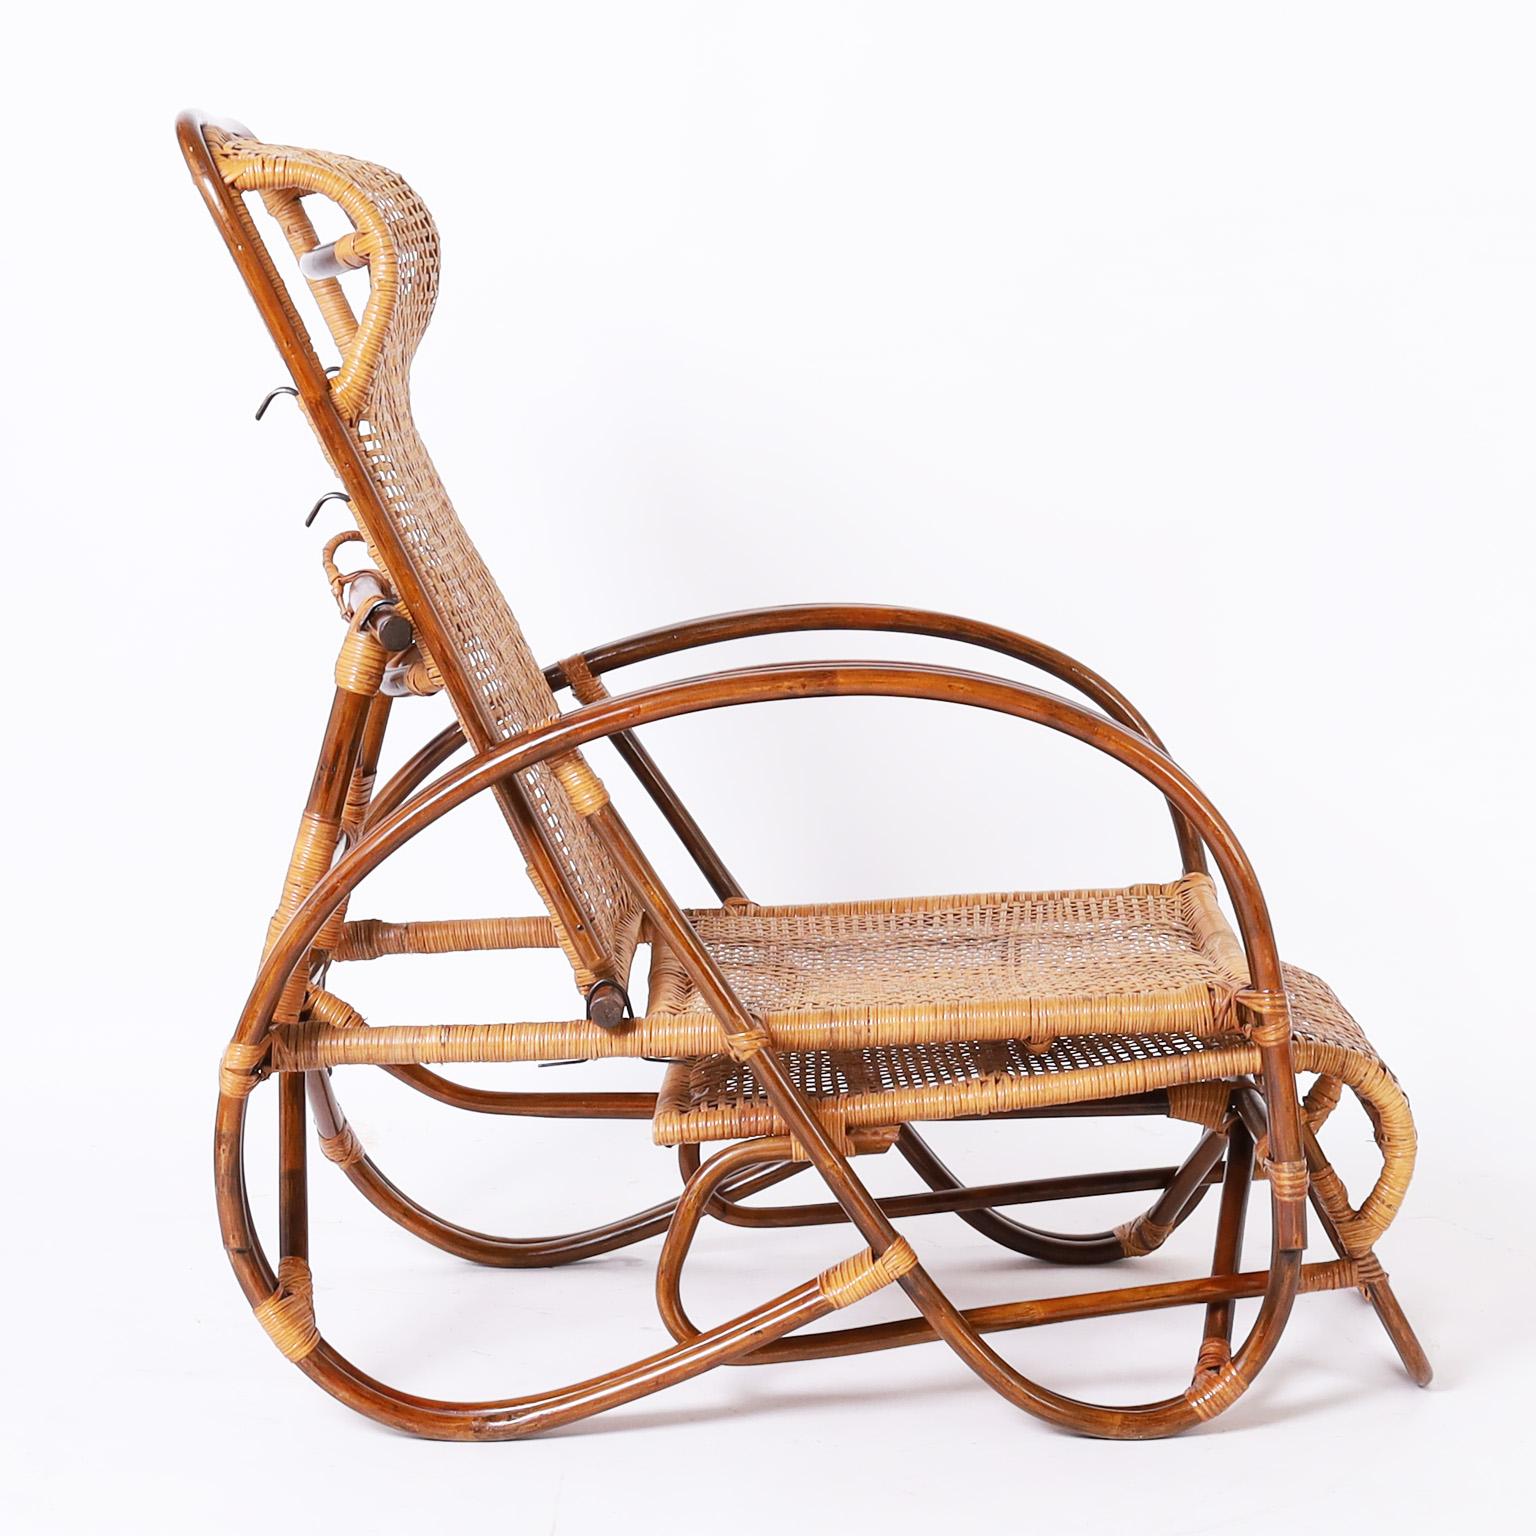 Vintage lounge chair crafted with bent bamboo and woven rattan in an elegant modern form featuring pullout footrest and adjustable back.

Extended depth 60